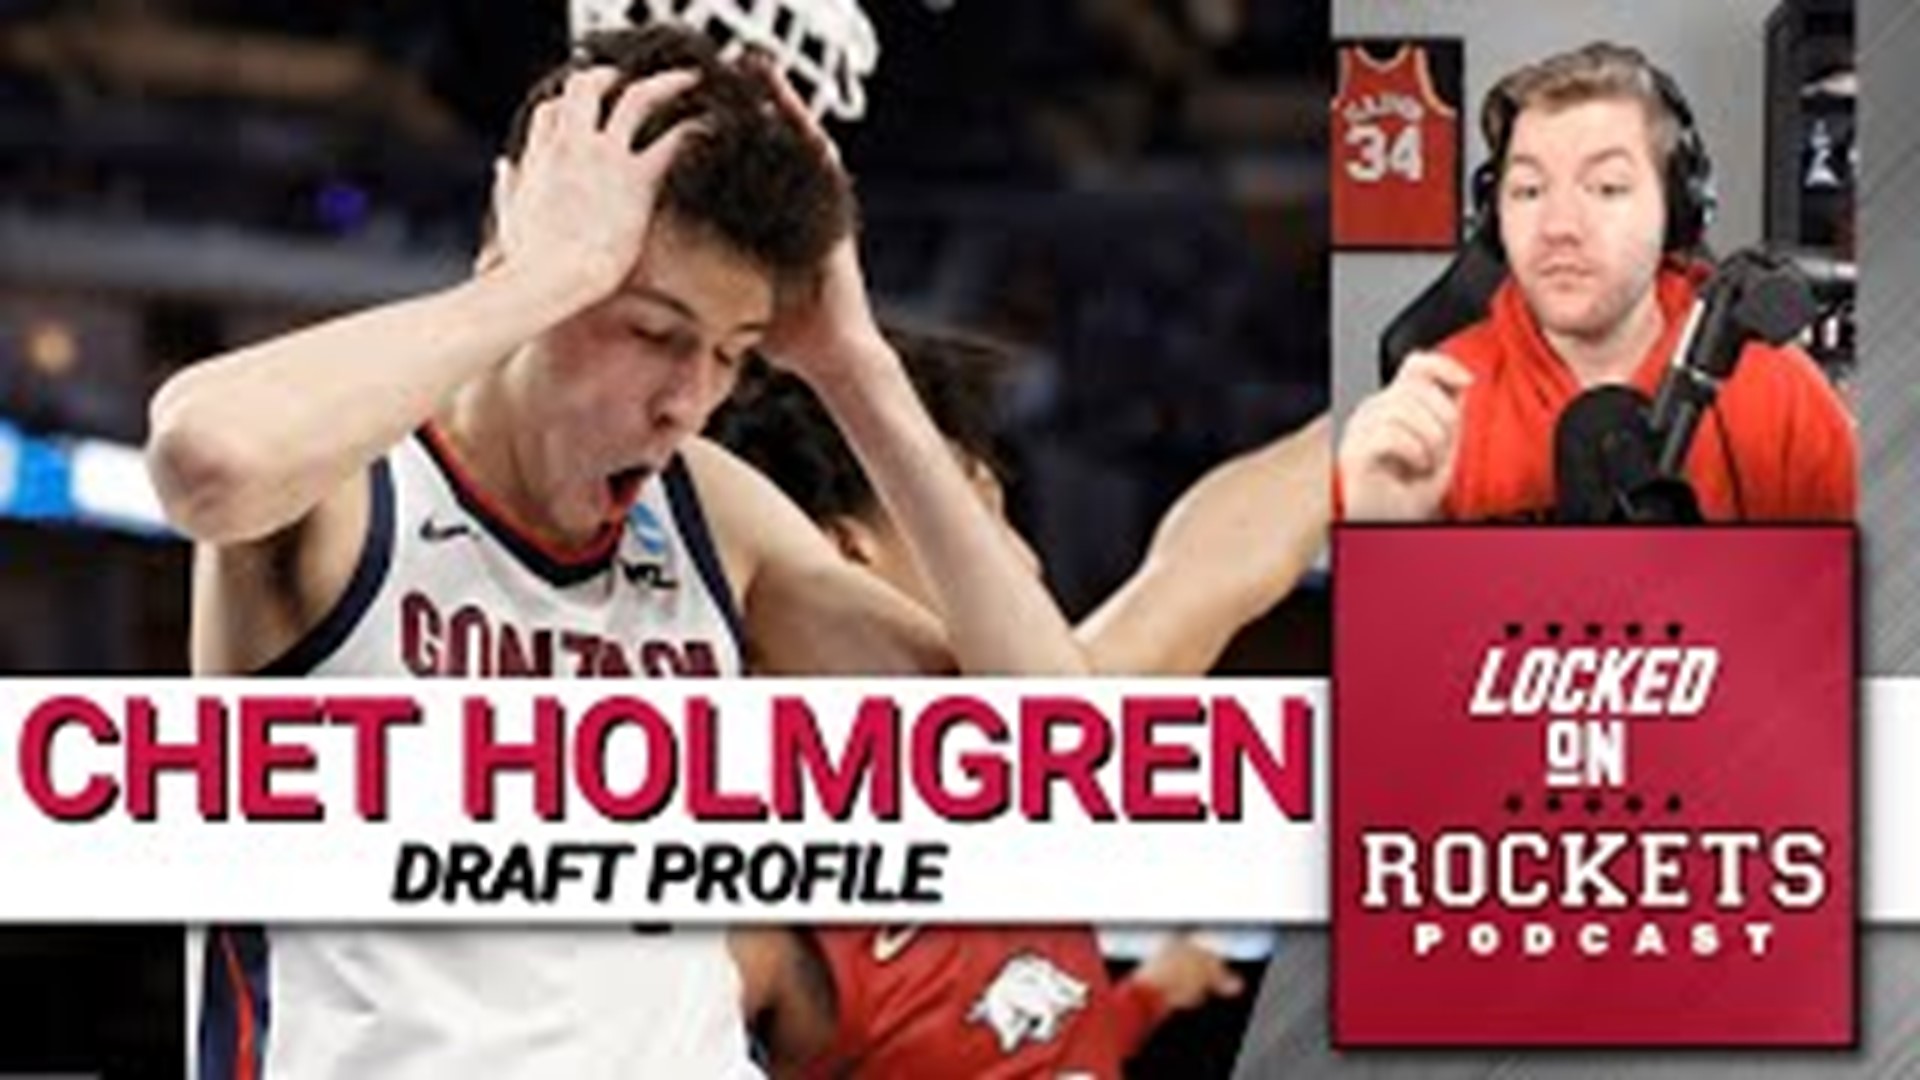 Host Jackson Gatlin discusses Chet Holmgren's NBA Draft profile, including strengths and weaknesses.